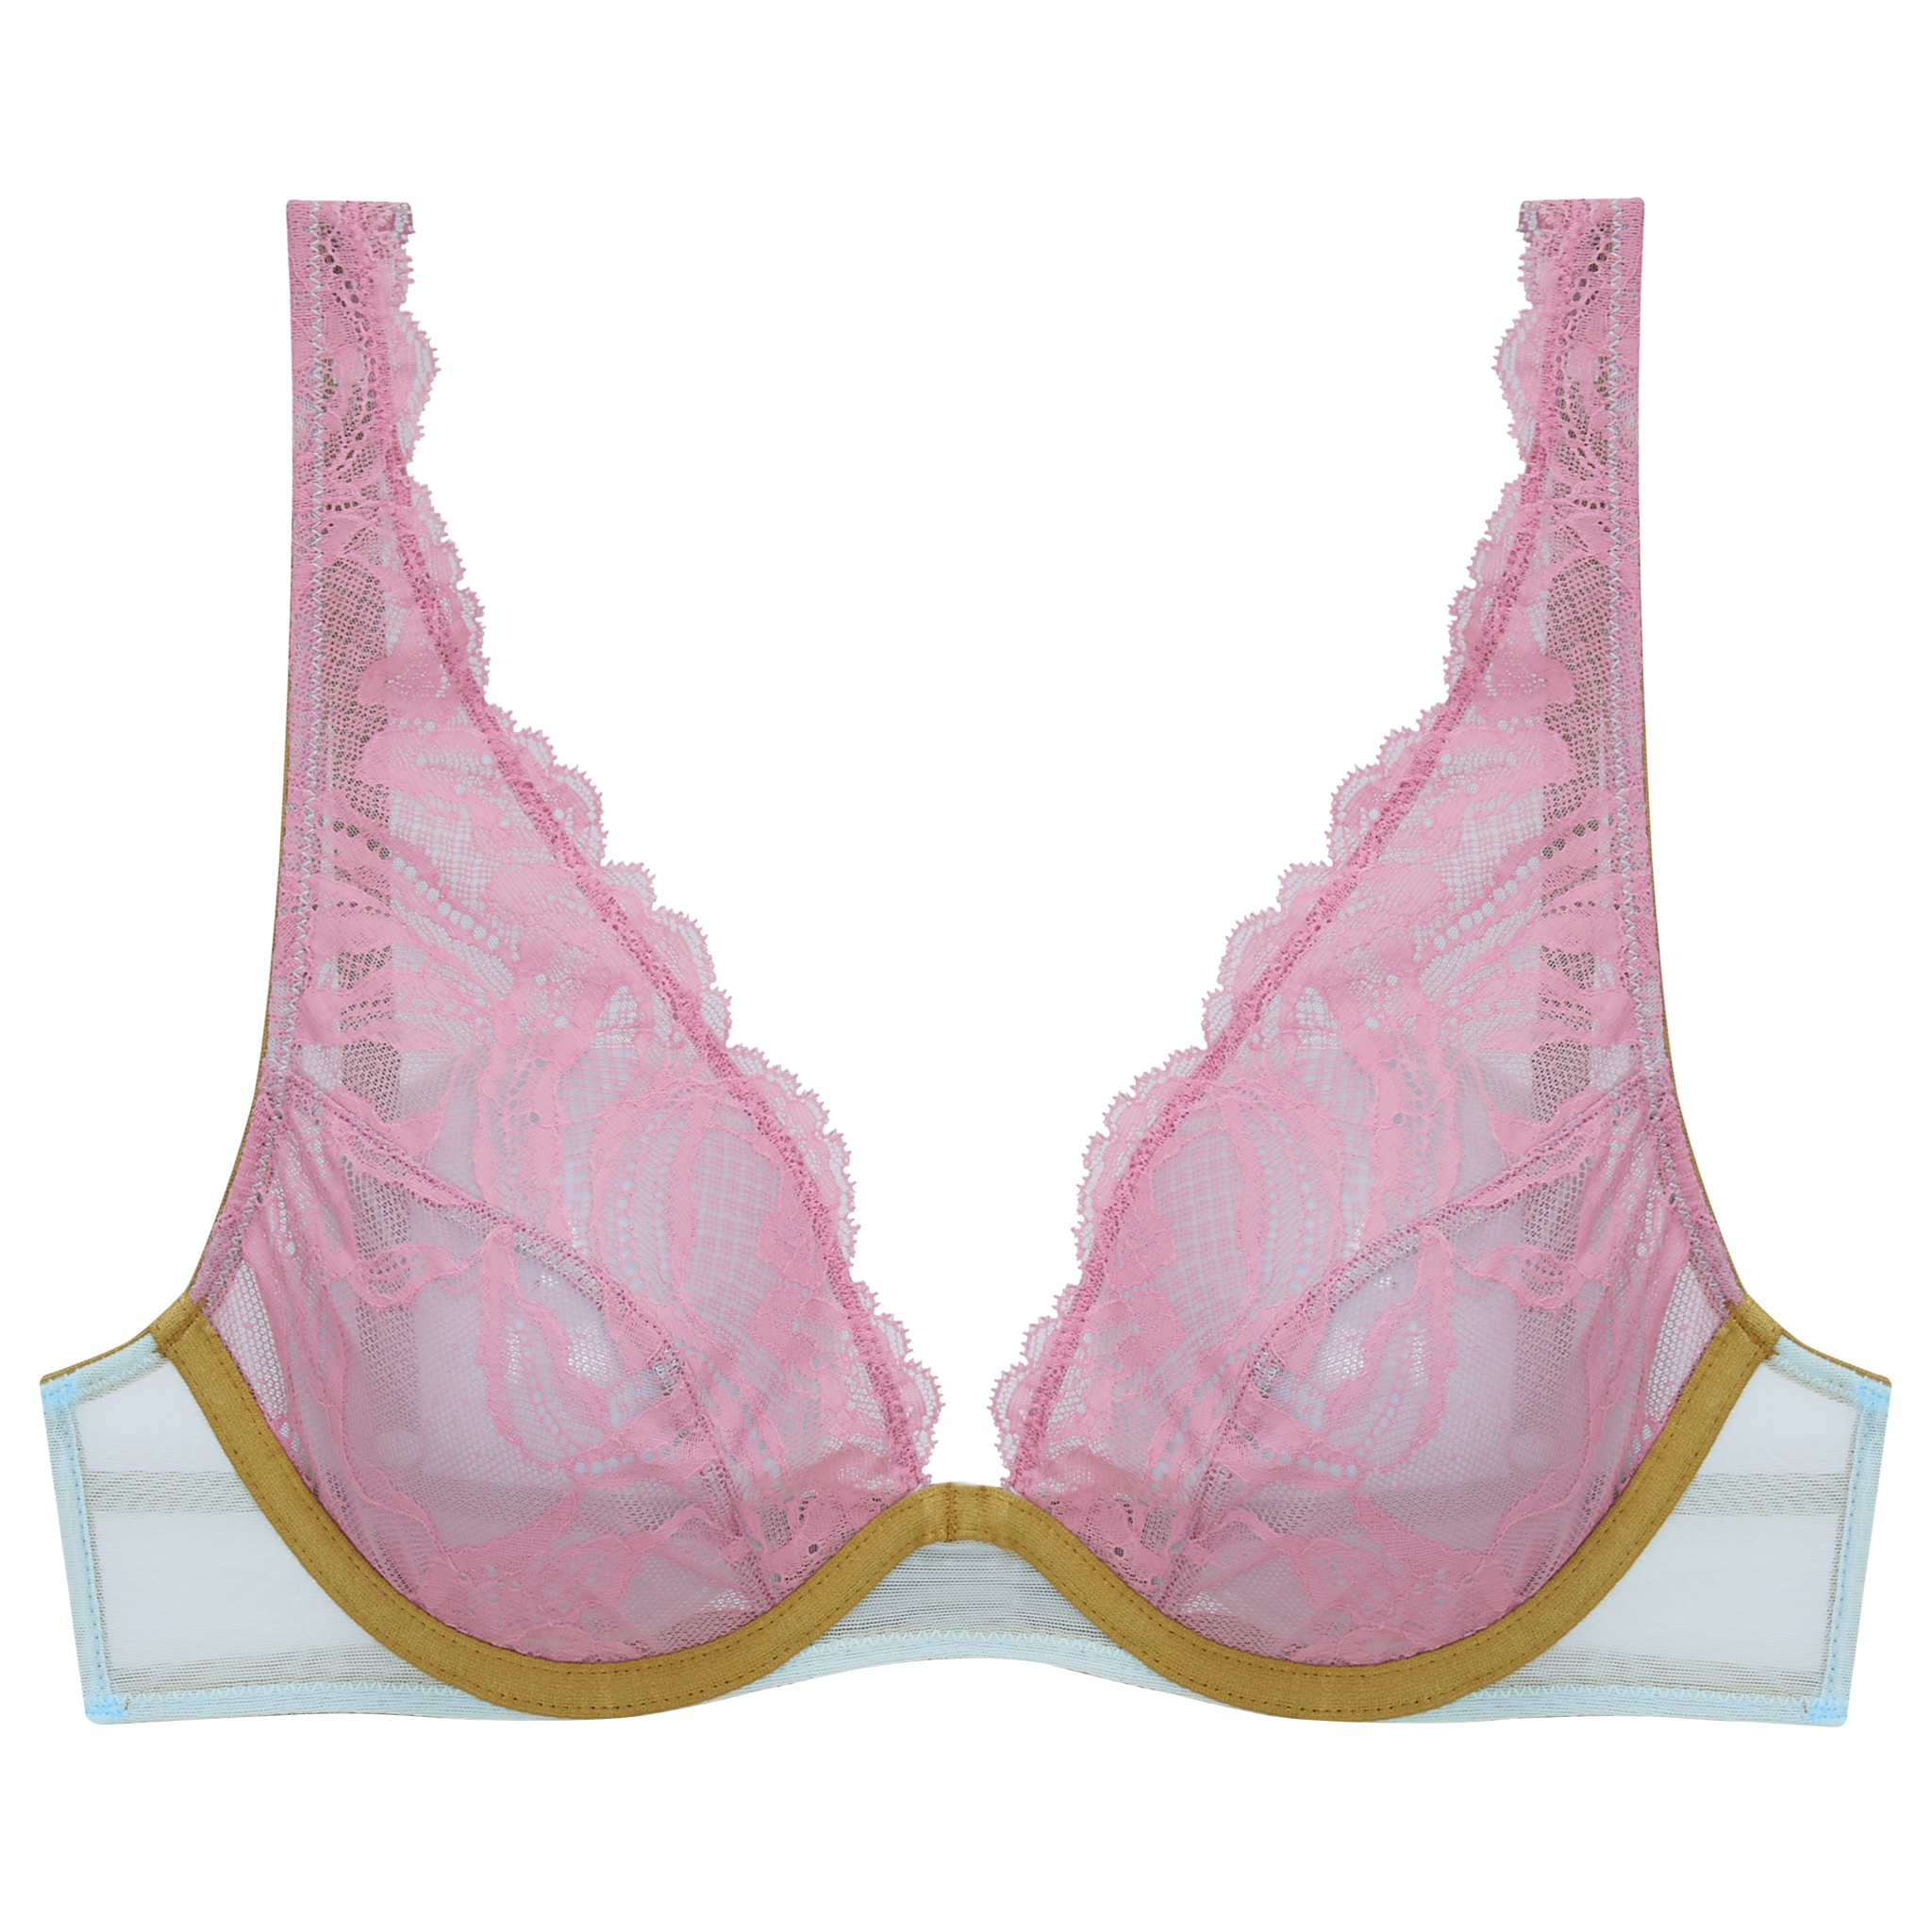 Malabis Lingerie Ltd - Sister sizes. Did you know that 34F 36E